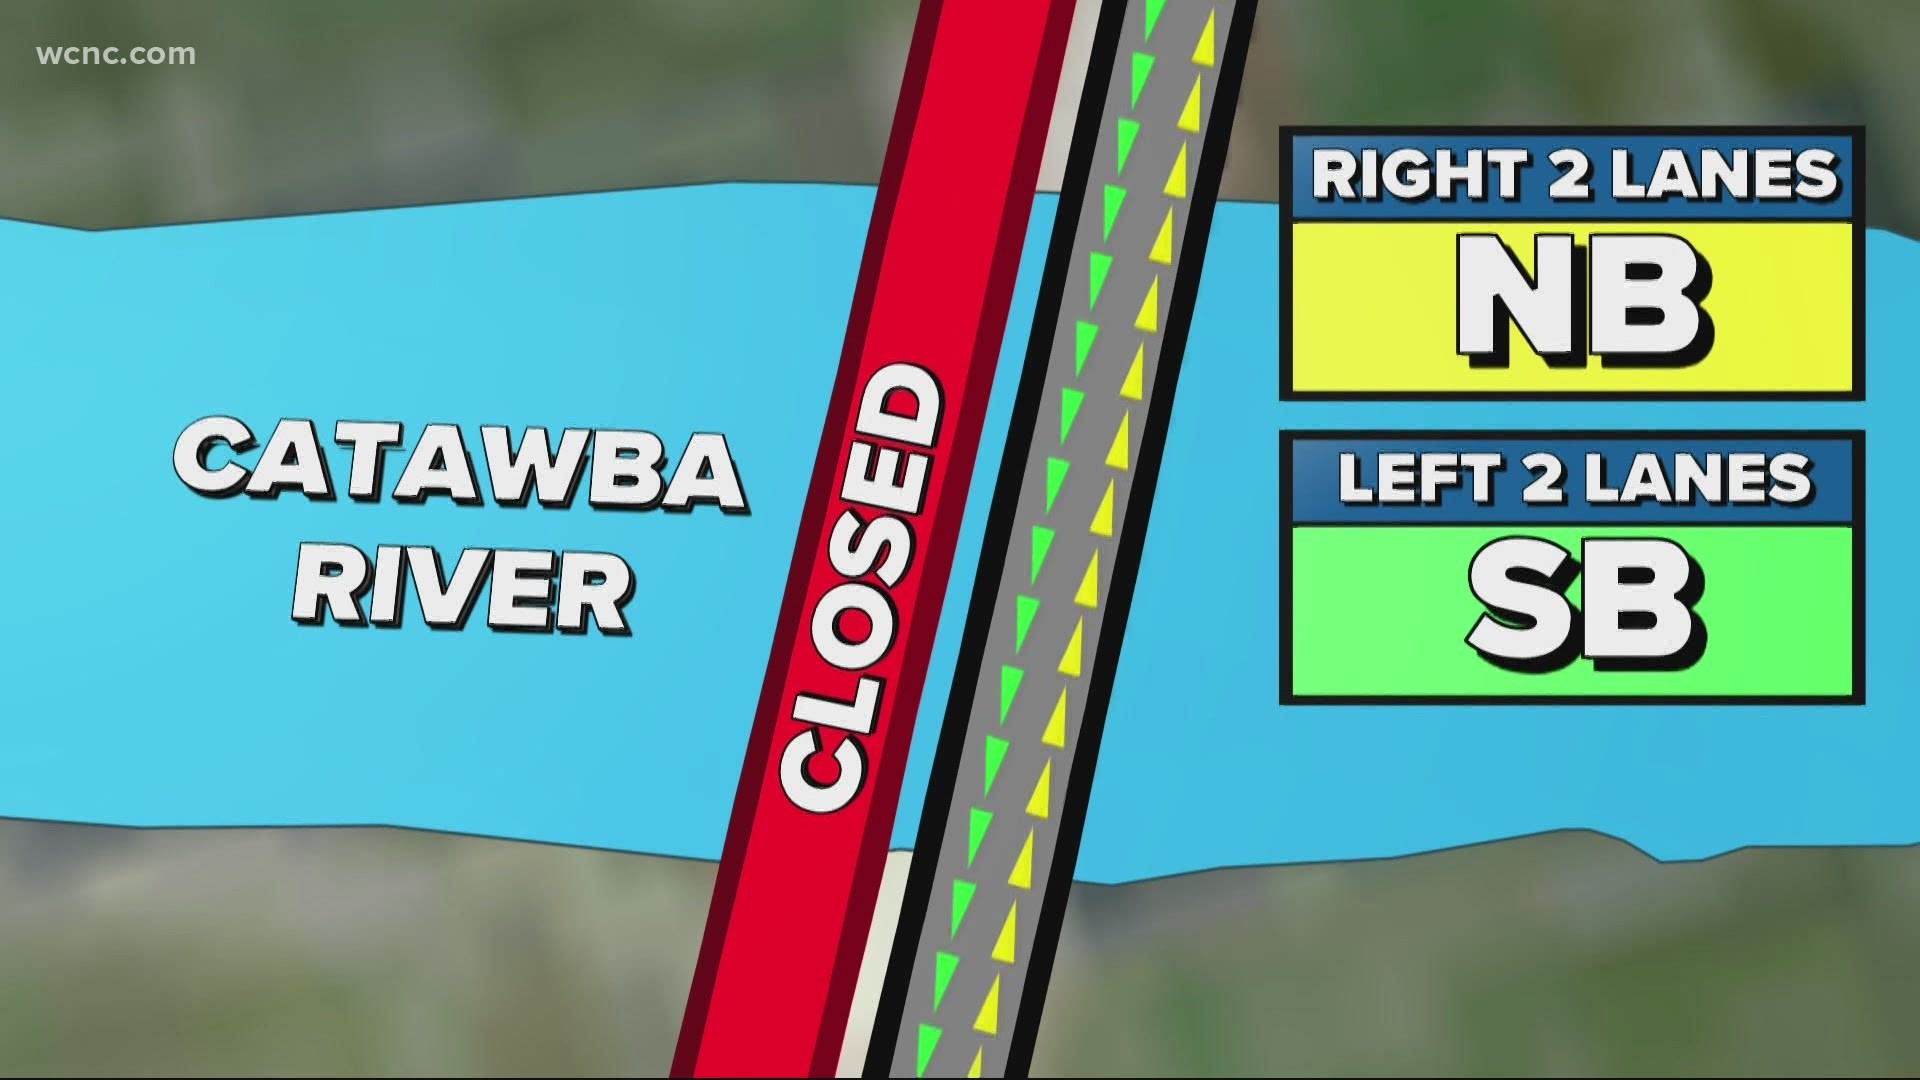 Heavy delays are expected next month as crews make major renovations to the Catawba River Bridge.